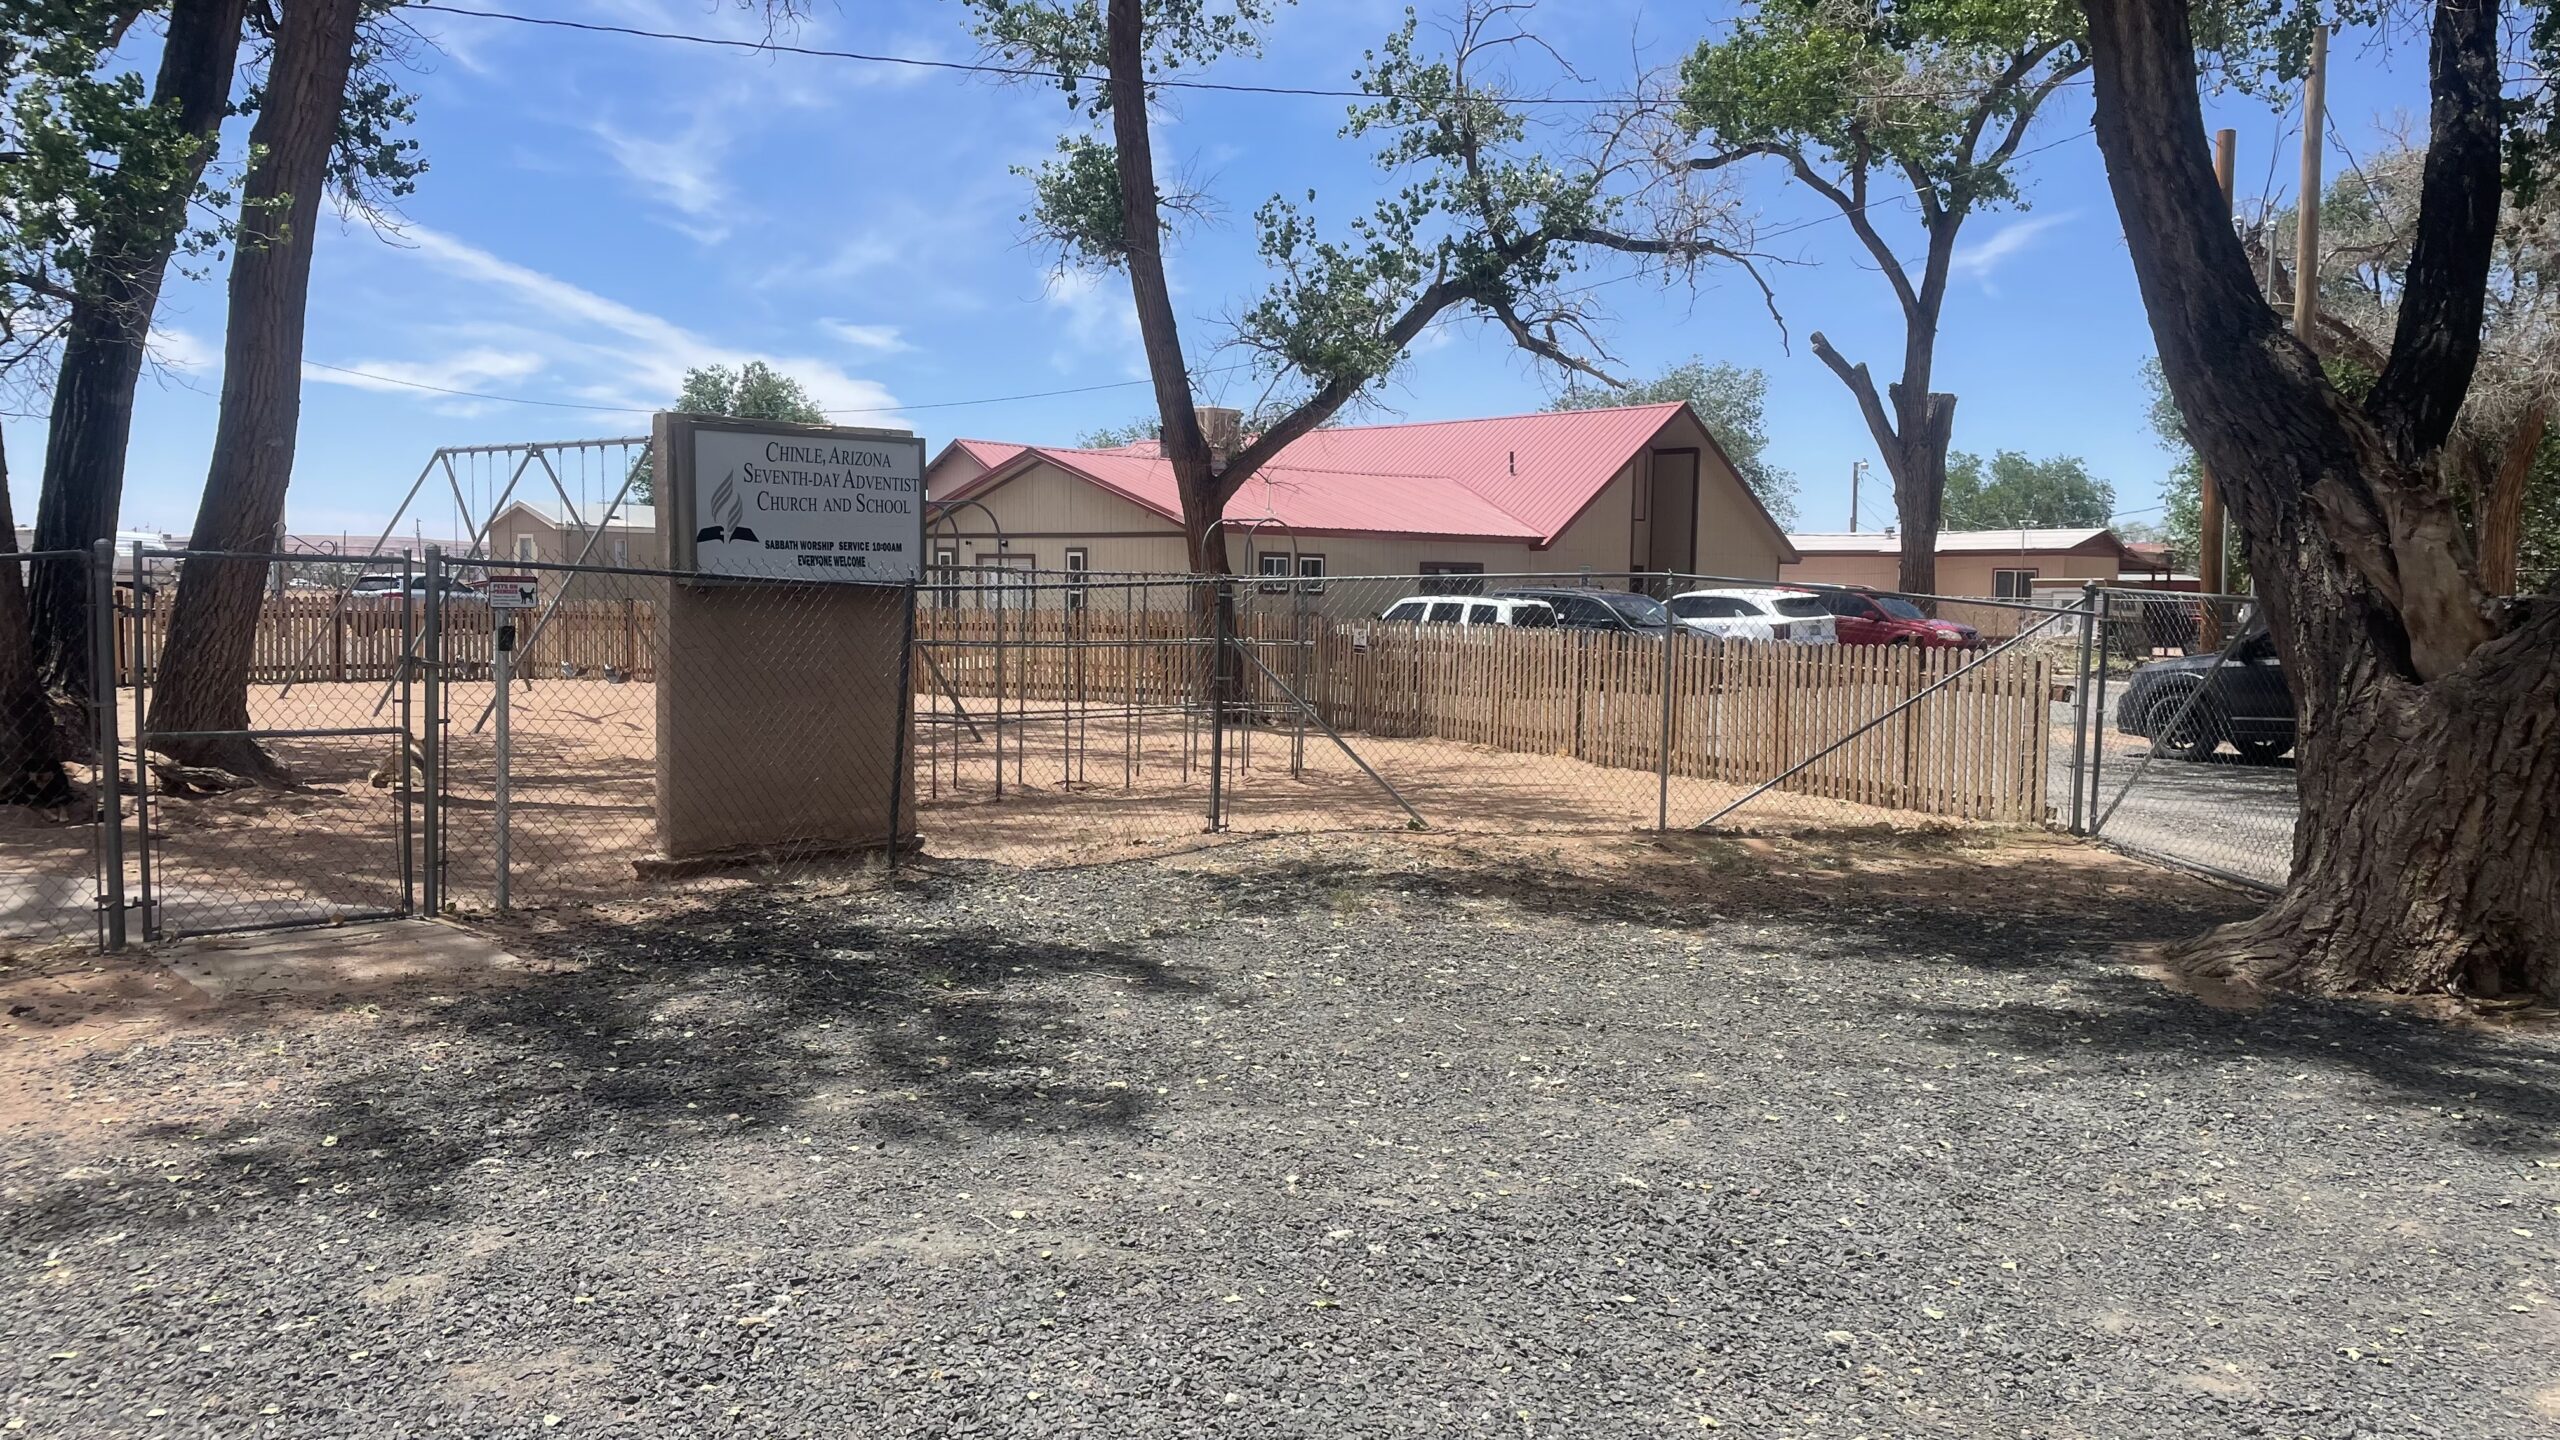 Meeting will be held at the Chinle SDA Church, which is in the heart of the Navajo Reservation.